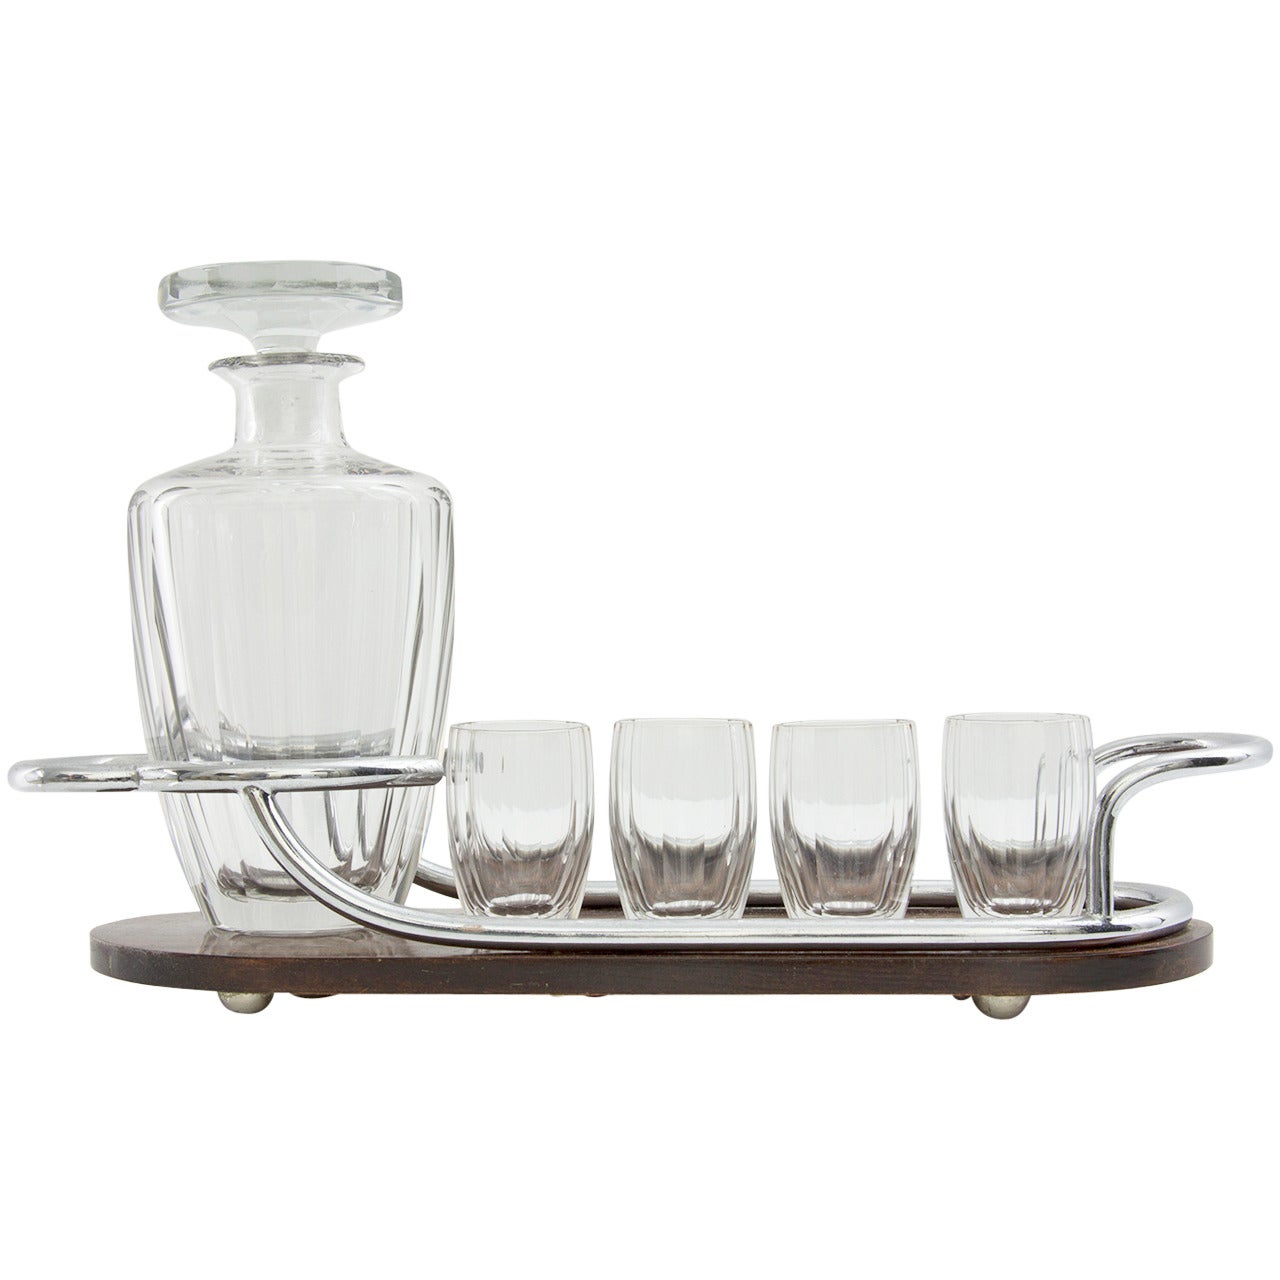 Art Deco Bar Set Decanter and Glasses on Mahogany and Silver Serving Tray